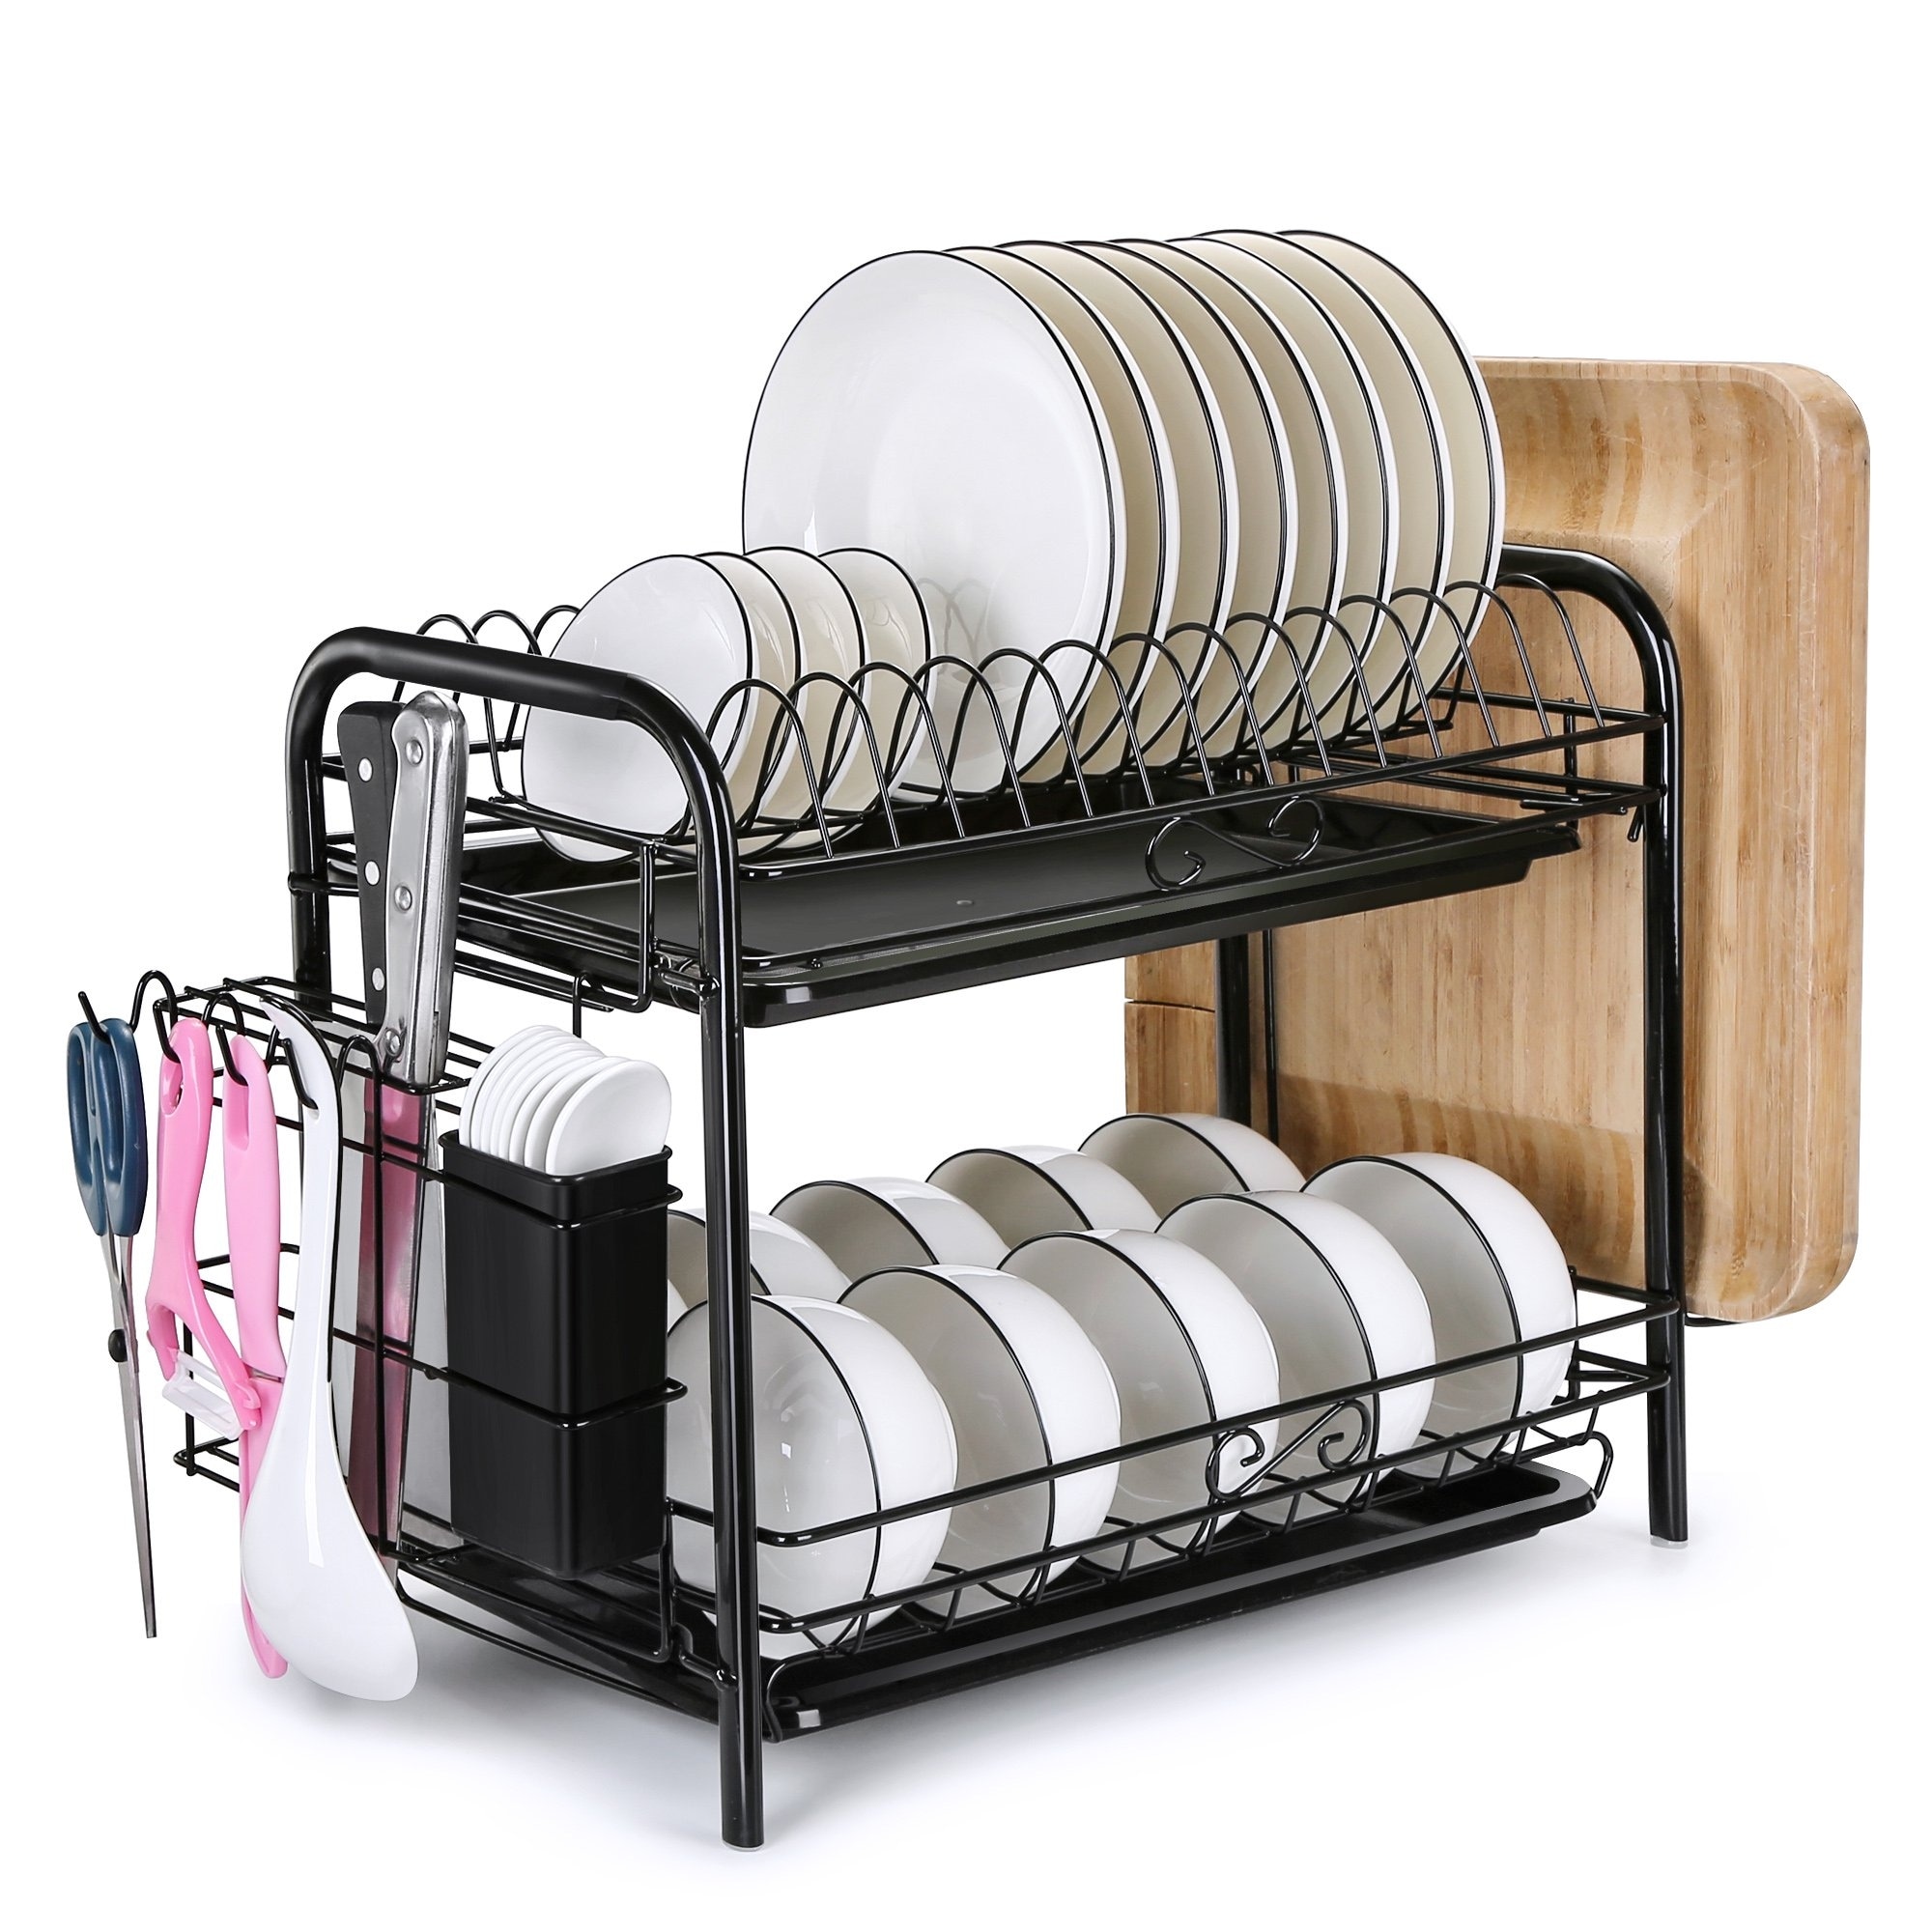 https://ak1.ostkcdn.com/images/products/is/images/direct/bbe4db6cfb3dcf72402b676fb7d60ae13e6dfb48/Extendable-Dish-Rack-with-Tray-and-Drainboard%2C-Cup-Utensil-Holder.jpg